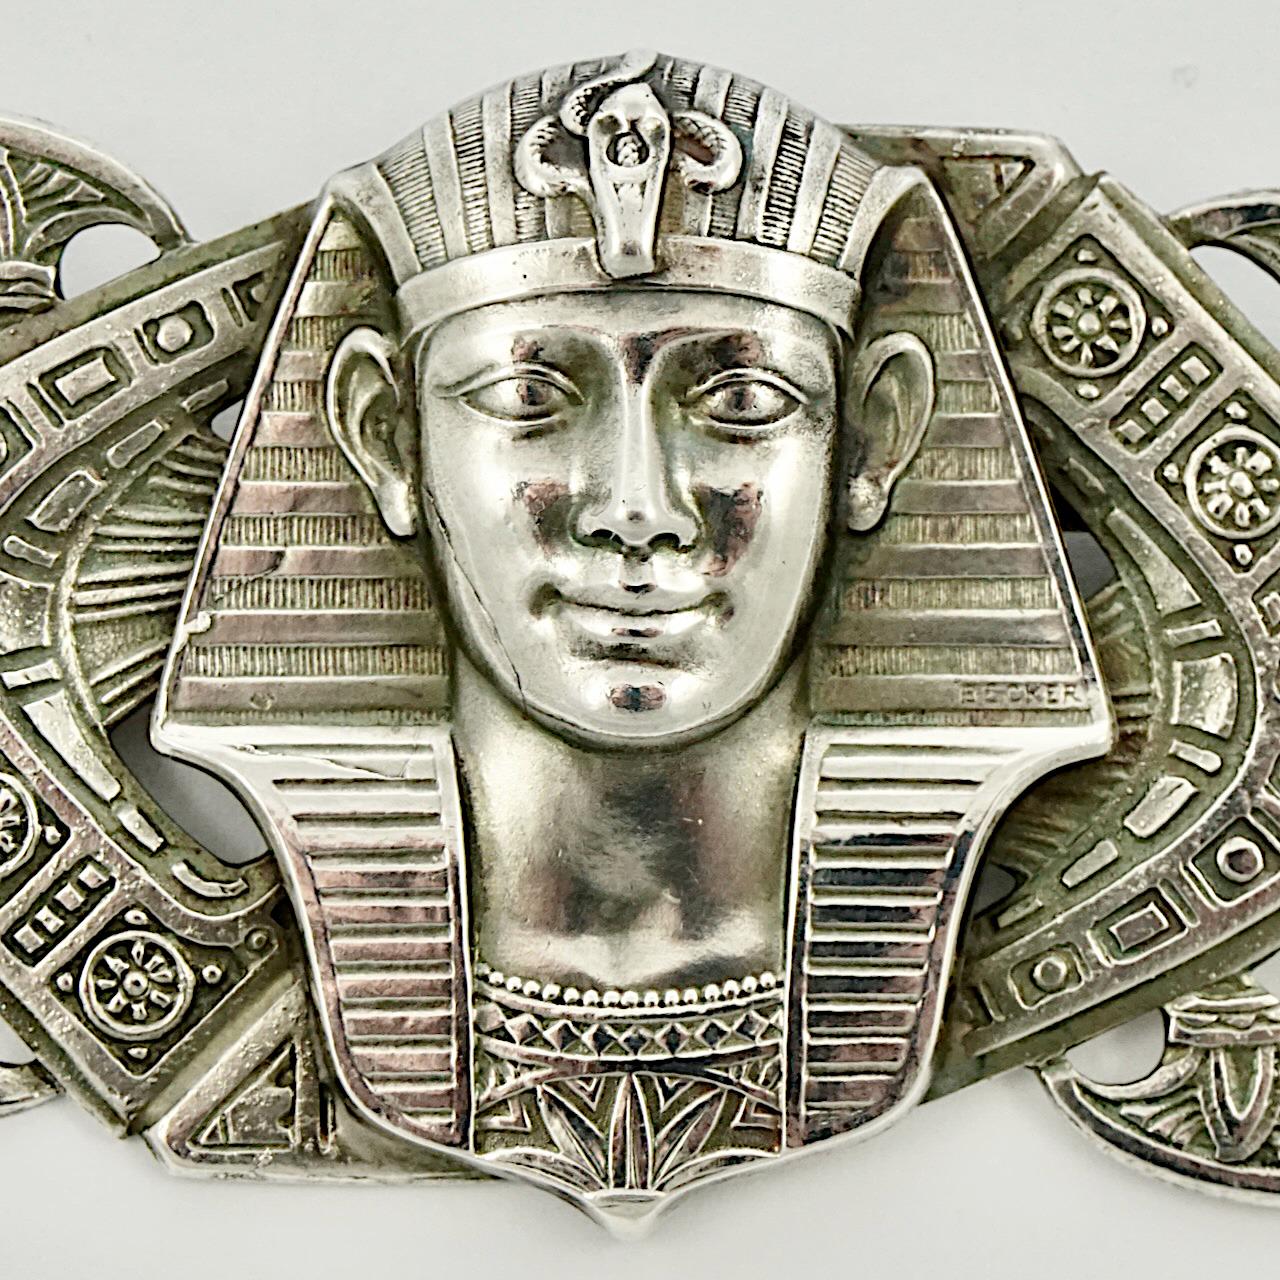 Large silver plated Egyptian Revival style brooch with a beautiful detailed pharaoh design. Measuring length 9.35 cm / 3.68 inches by width 4.5 cm / 1.77 inches. This lovely brooch has been made with old 1920s findings found in Paris. The brooch is